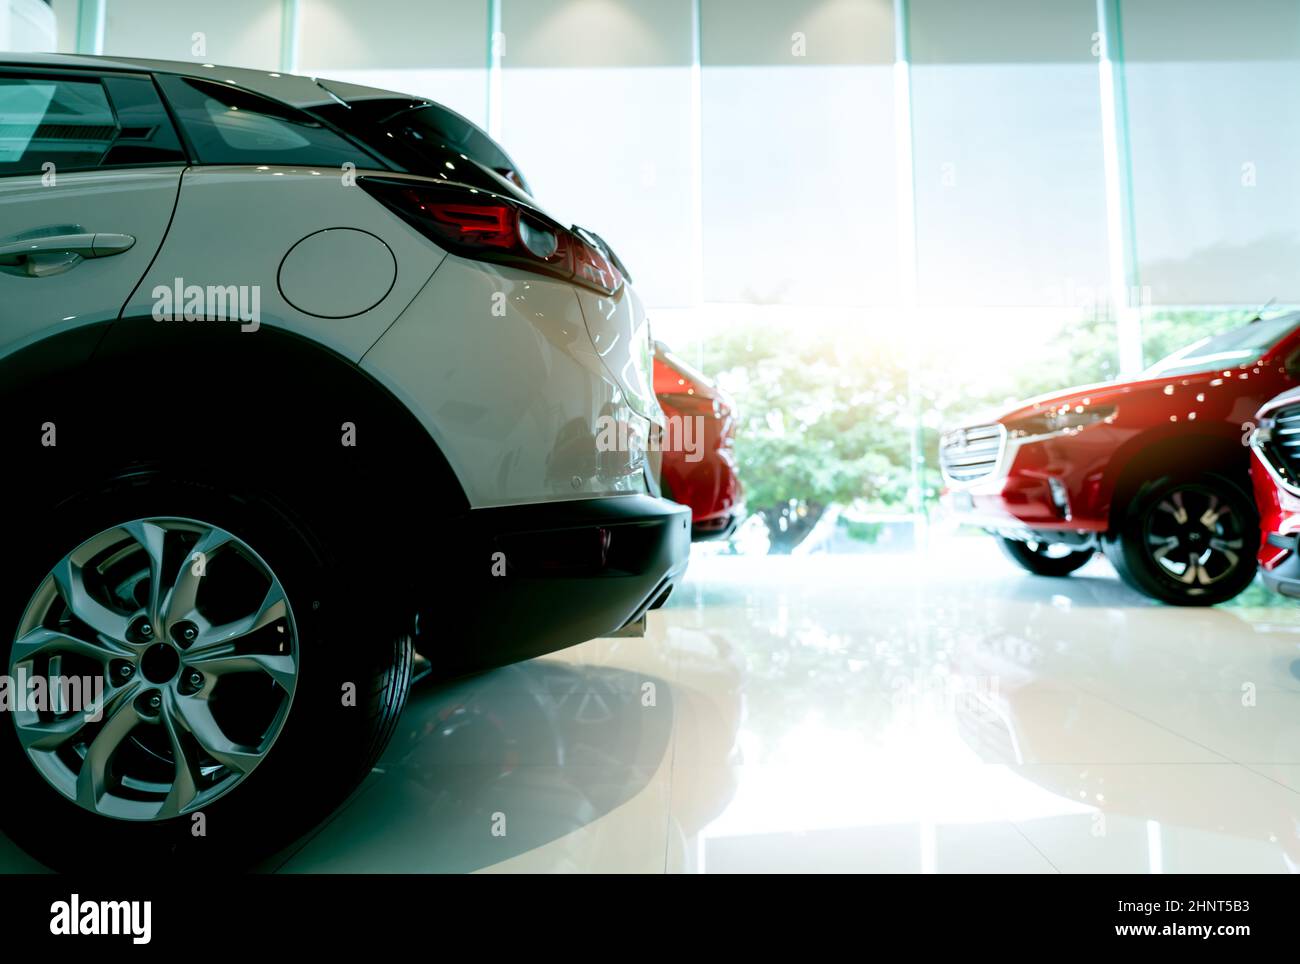 White luxury SUV car parked in modern showroom and blurred red car. Car dealership and auto leasing concept. Automotive industry. Showroom interior. New car stock for sale. Glass building of showroom. Stock Photo